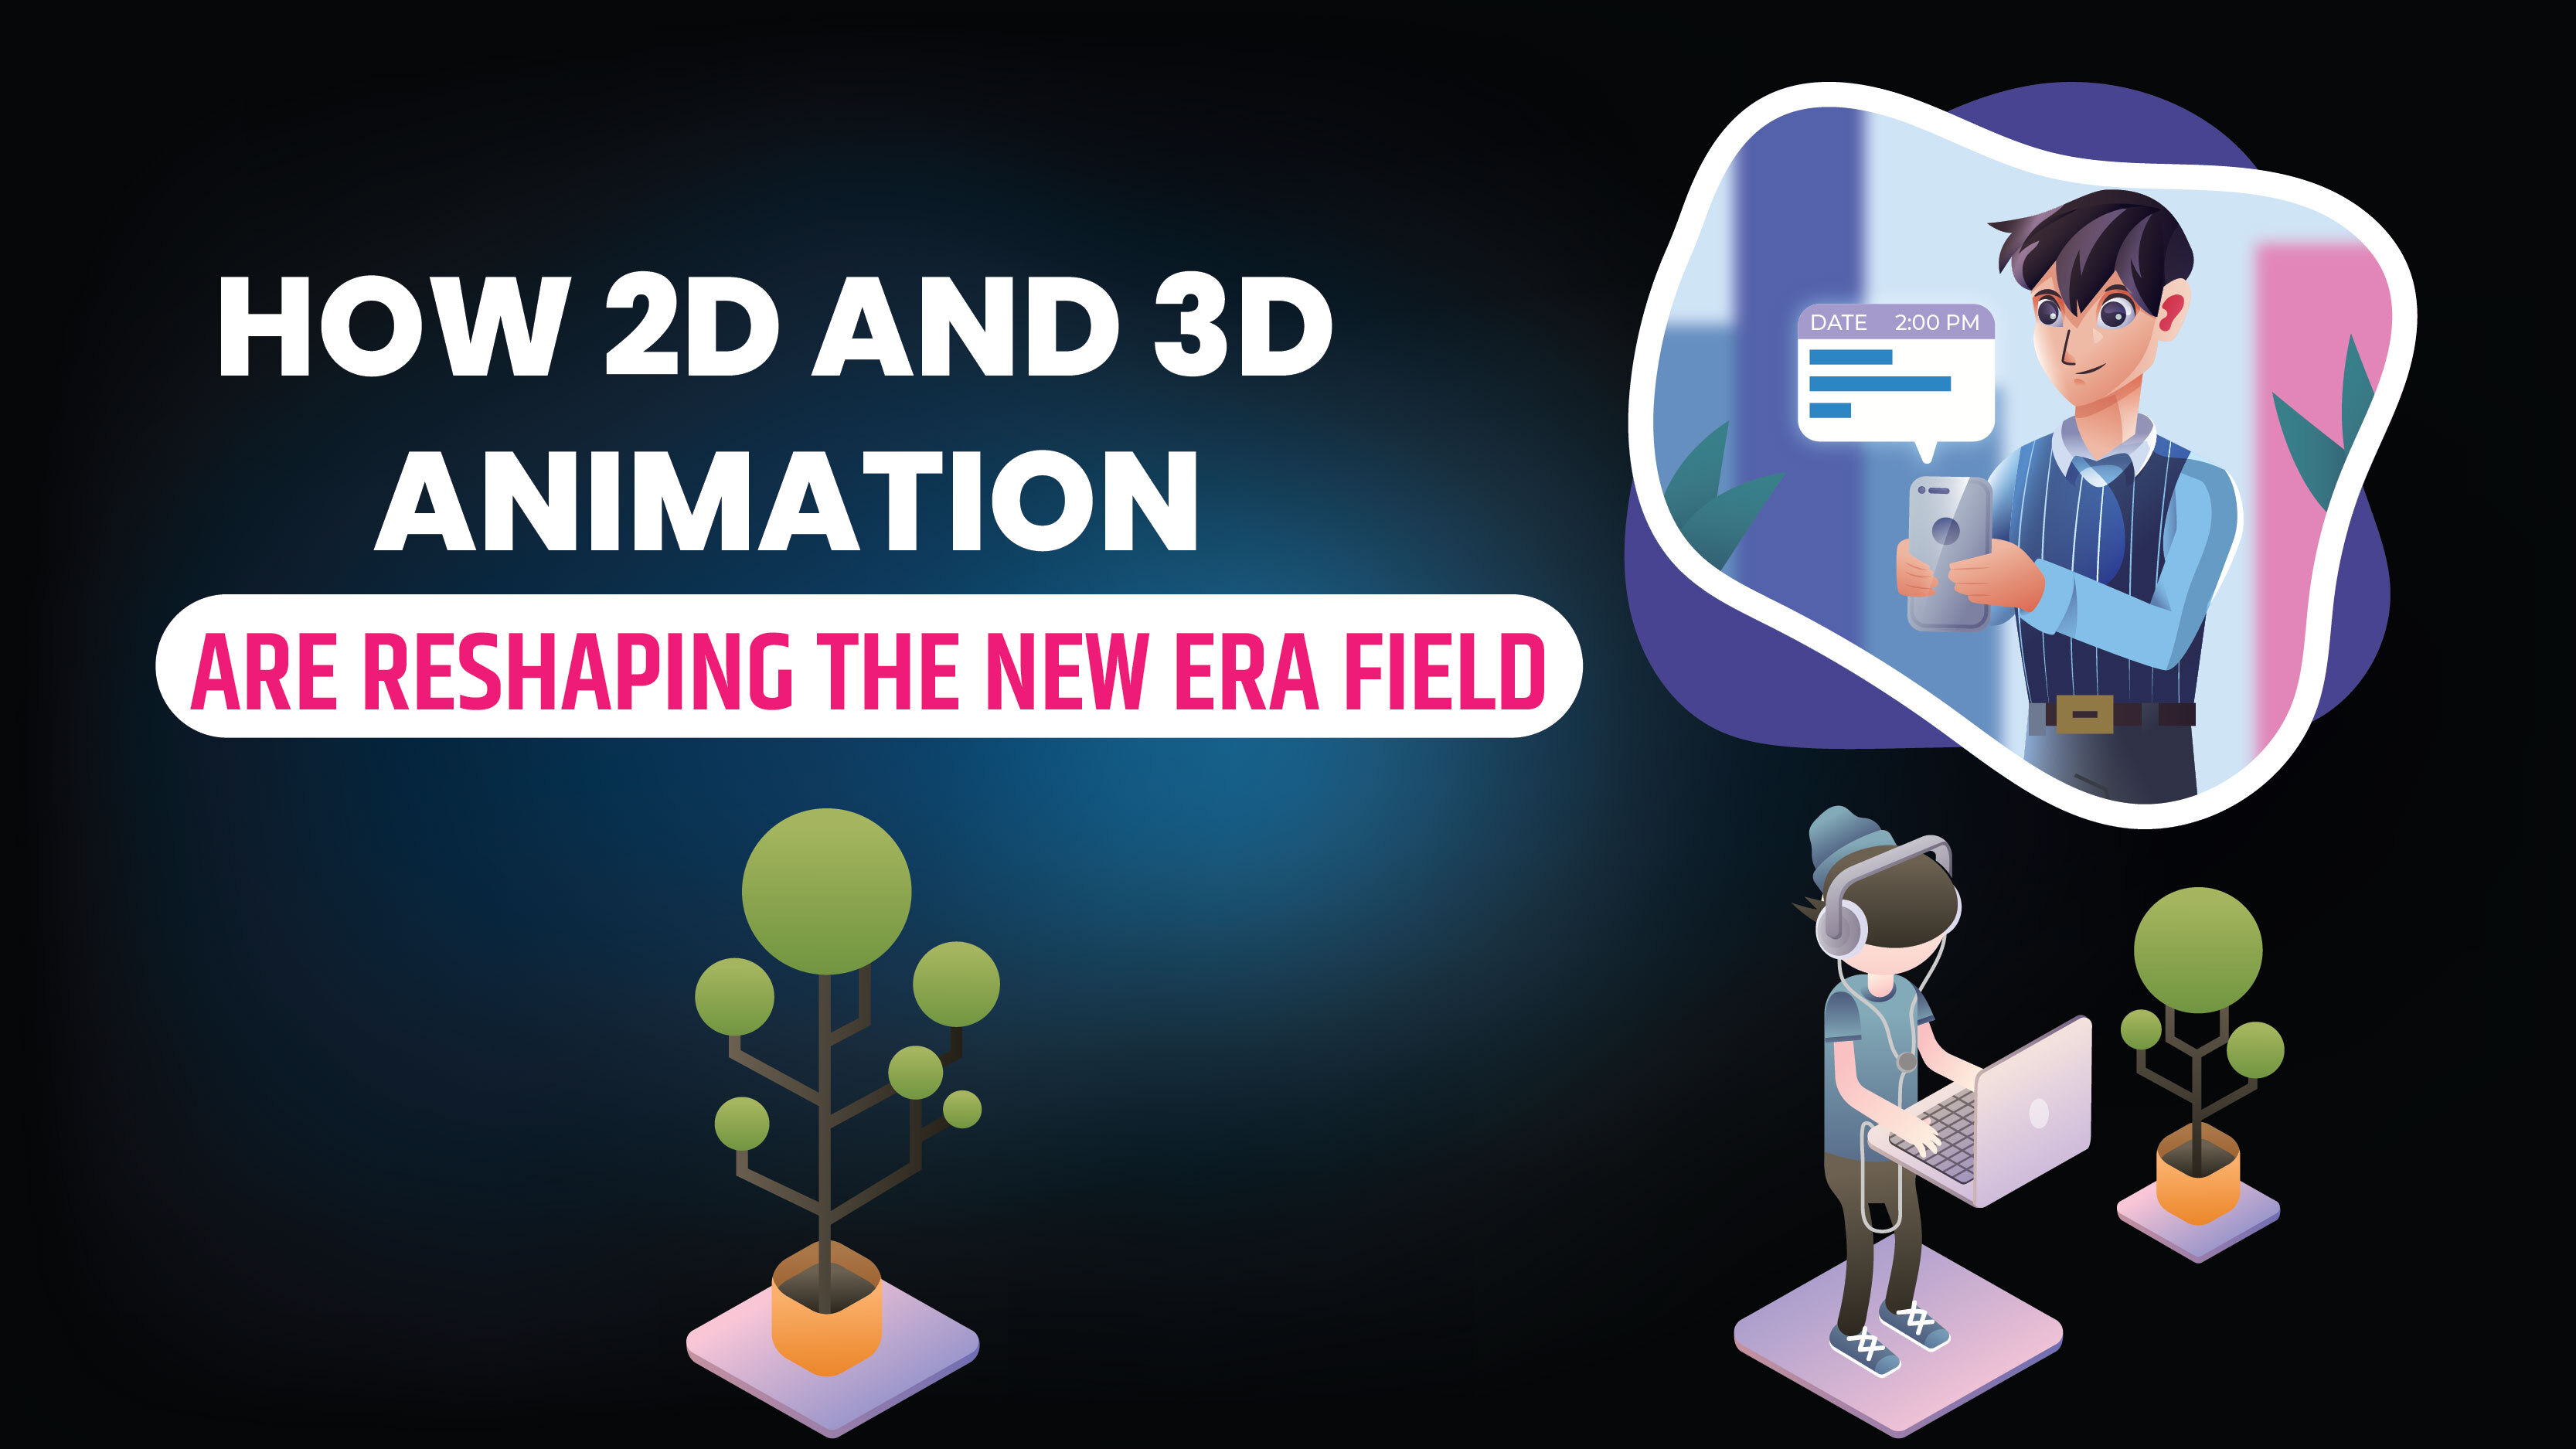 How 2D and 3D Animation Are Reshaping the new era field